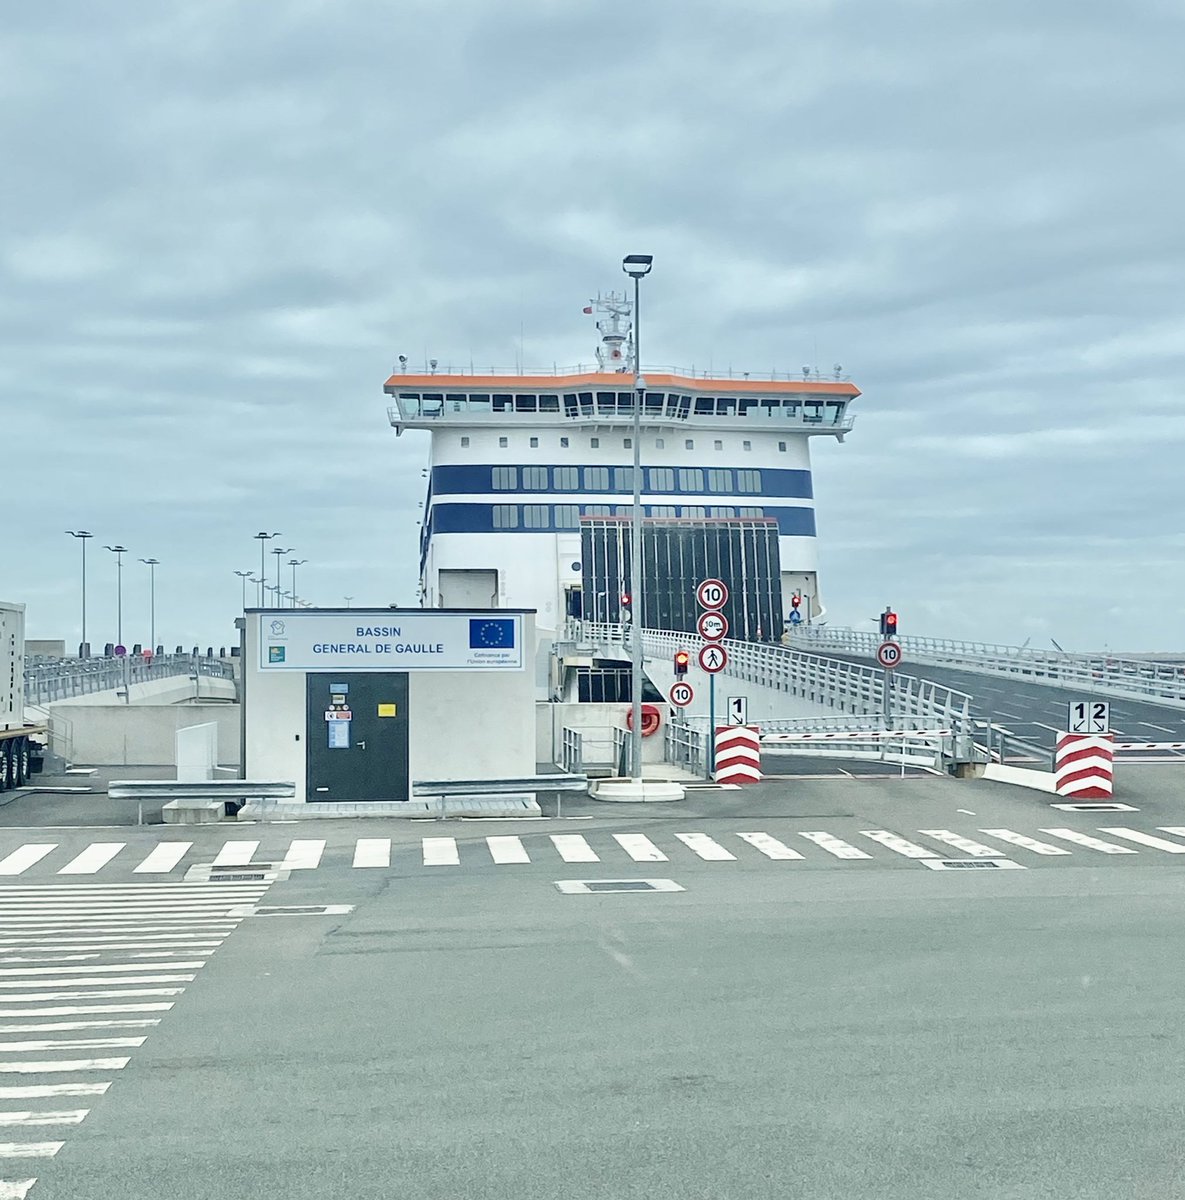 We are through border control and are in the front of the queue for the 12:35 ferry from Calais! 🇫🇷 update will be given once we are through the other side and en route to Glyn! 🥳